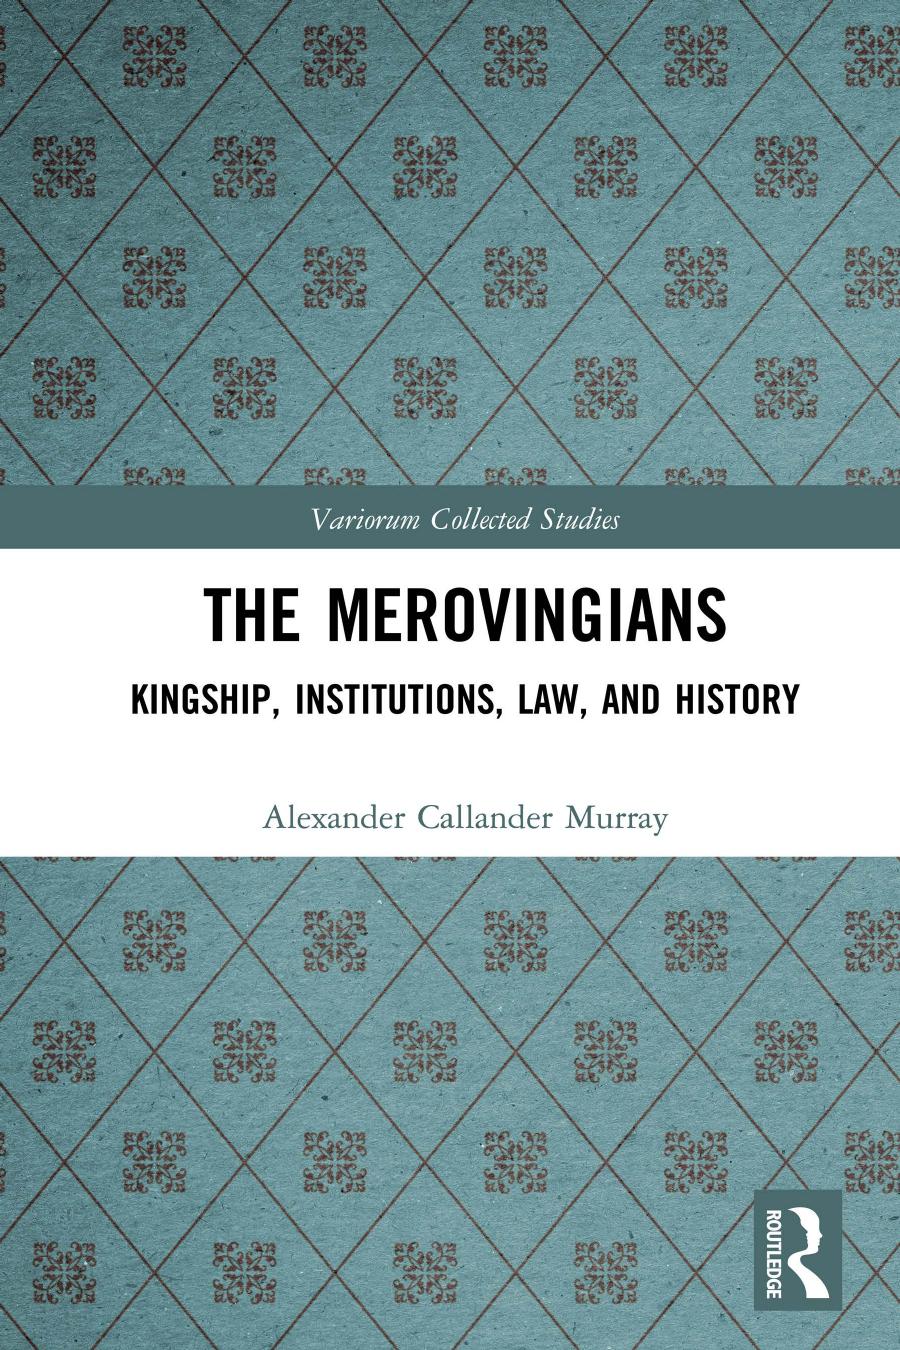 The Merovingians; Kingship, Institutions, Law, and History